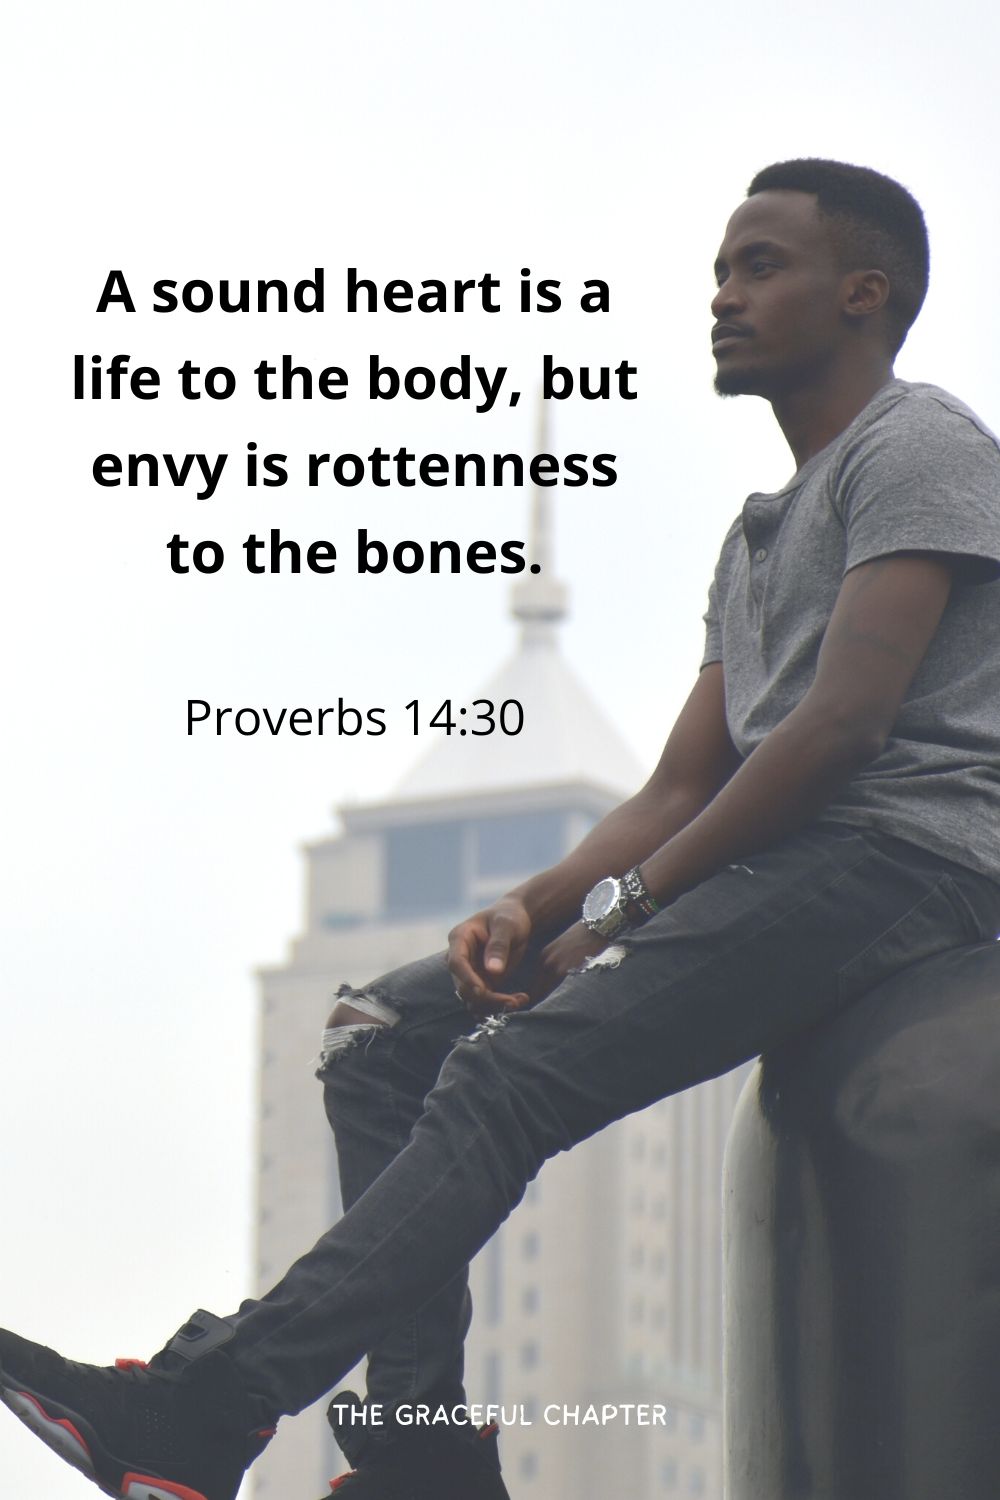 A sound heart is a life to the body, but envy is rottenness to the bones.